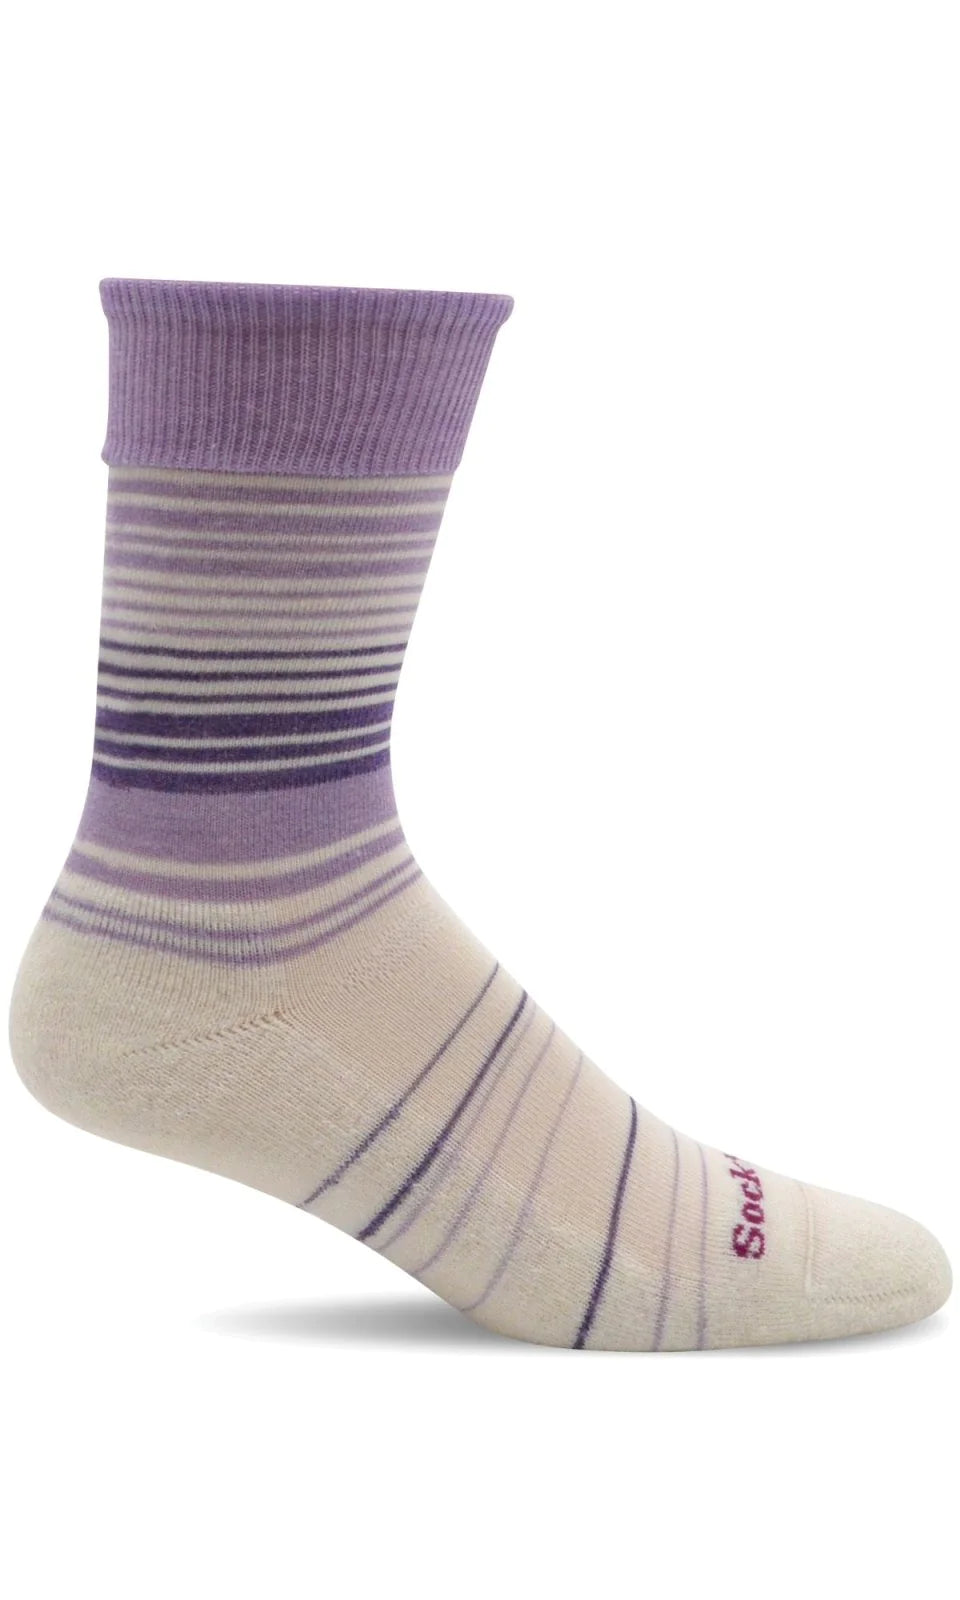 Easy Does It Lavender (Women's size scale)